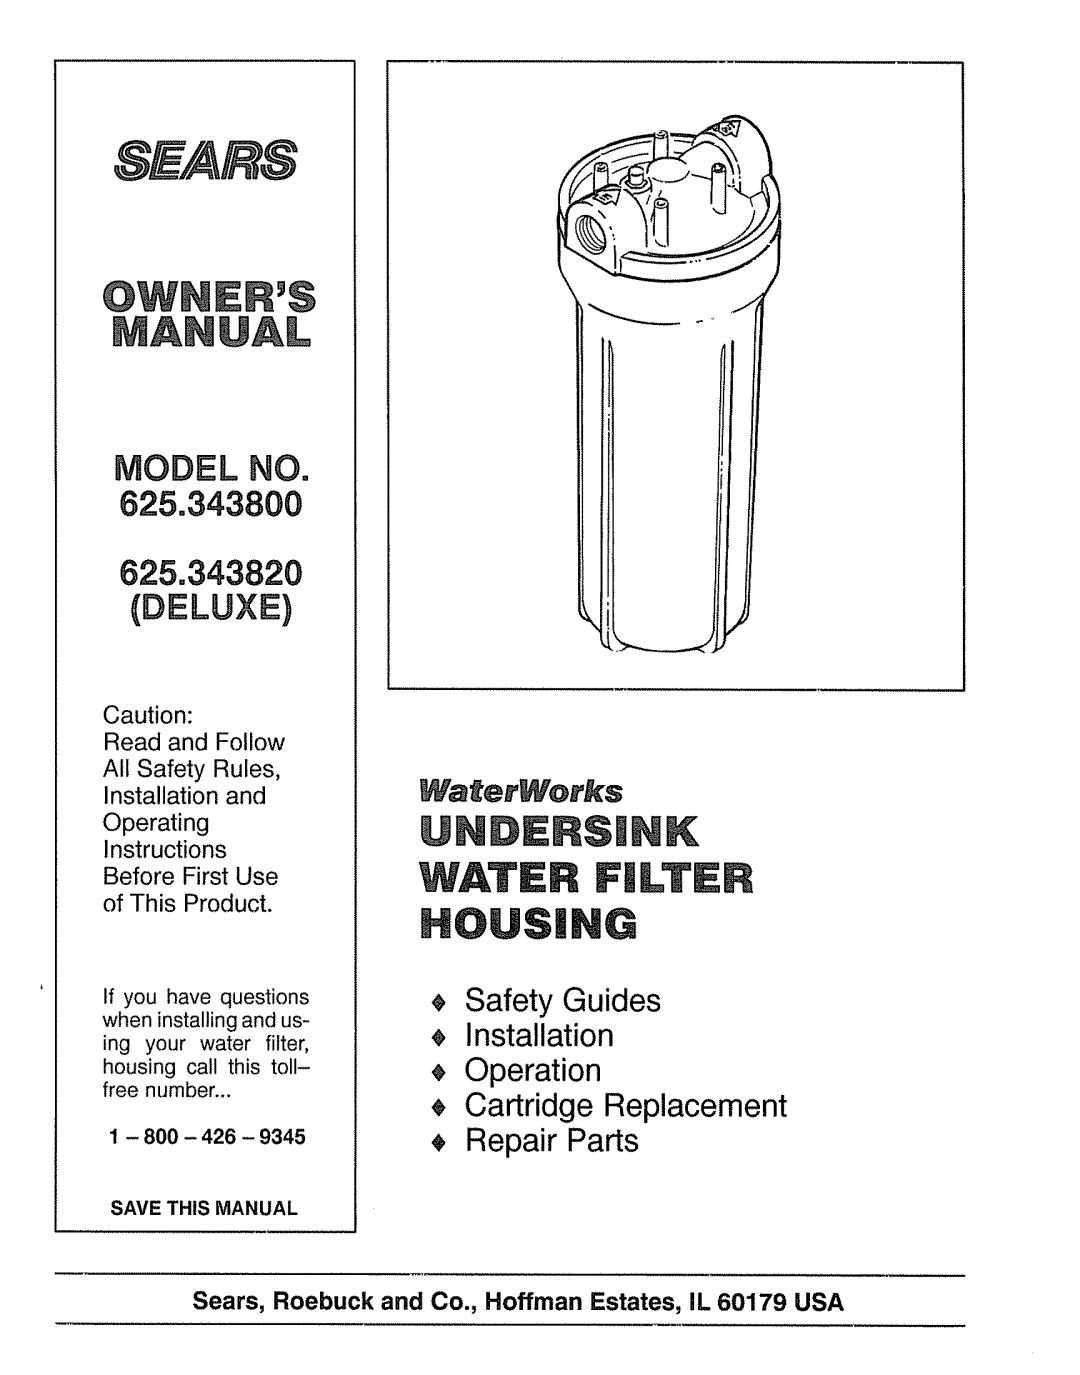 Sears 625.3438 operating instructions Model No, Deluxe, WaterWorks Safety Guides Installation Operation, Save This Manual 